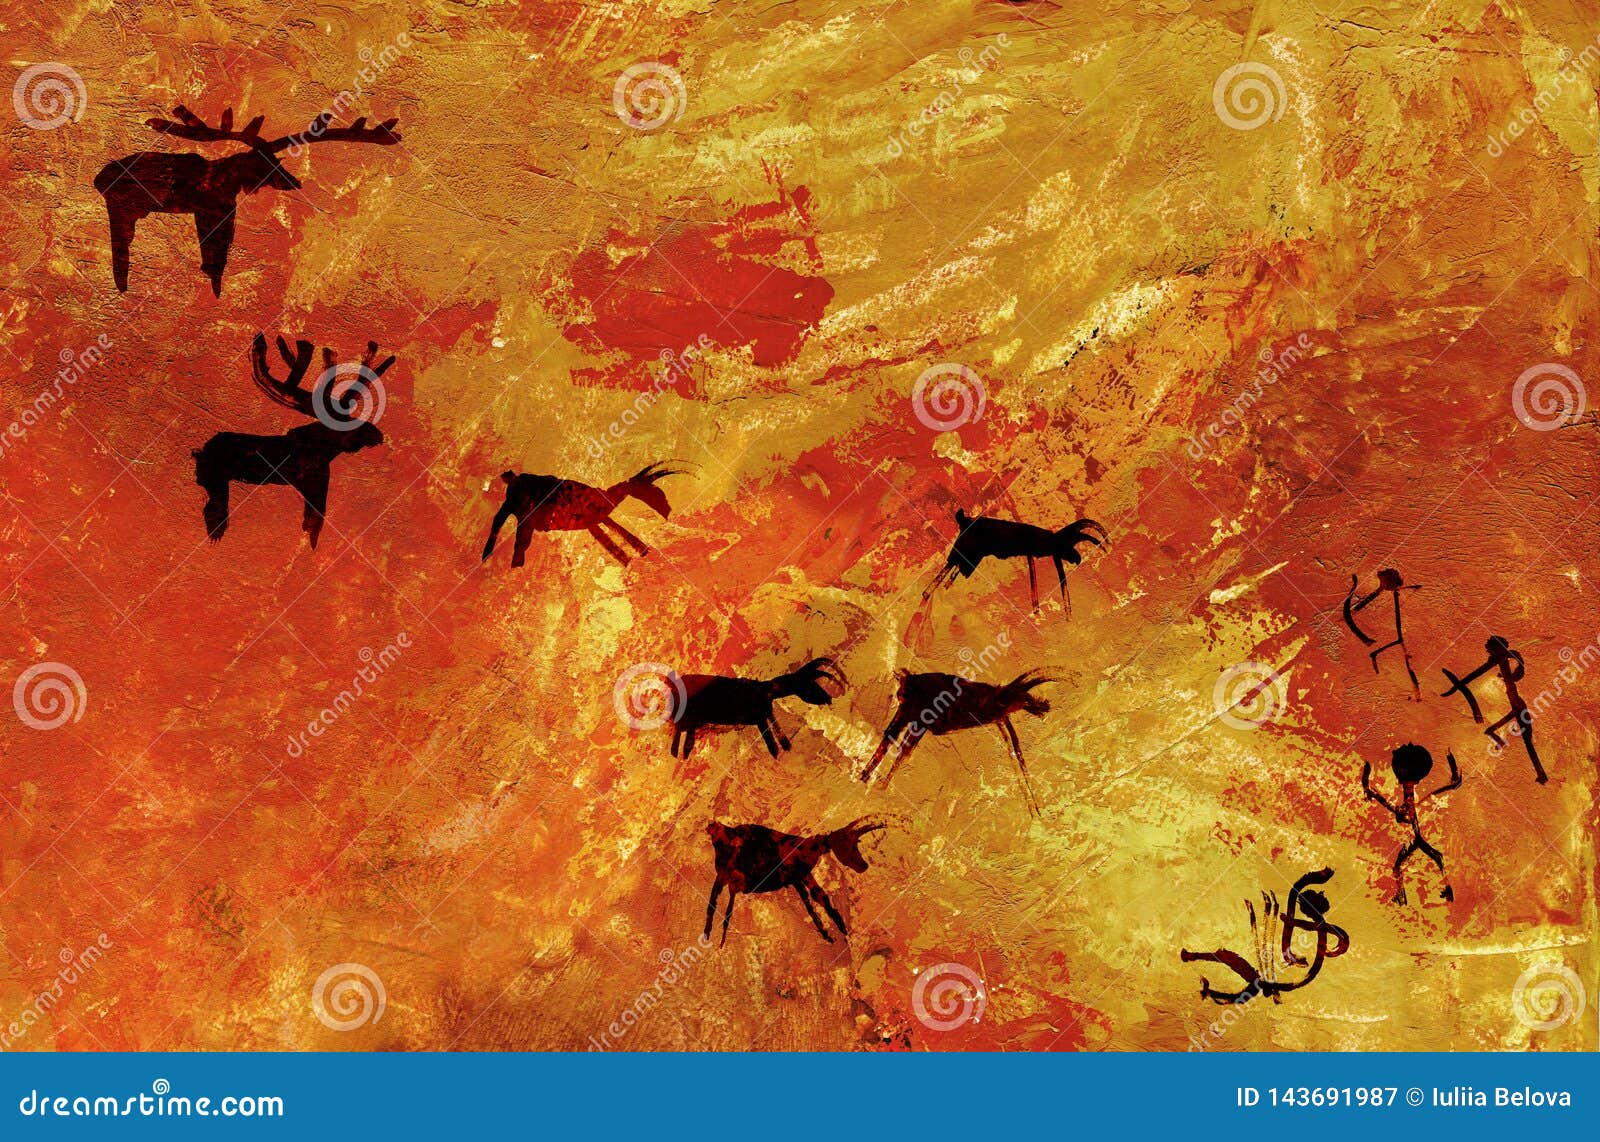 group of primitive people hunts a herd of hoofed animals of deer and moose. stylization of cave rock art